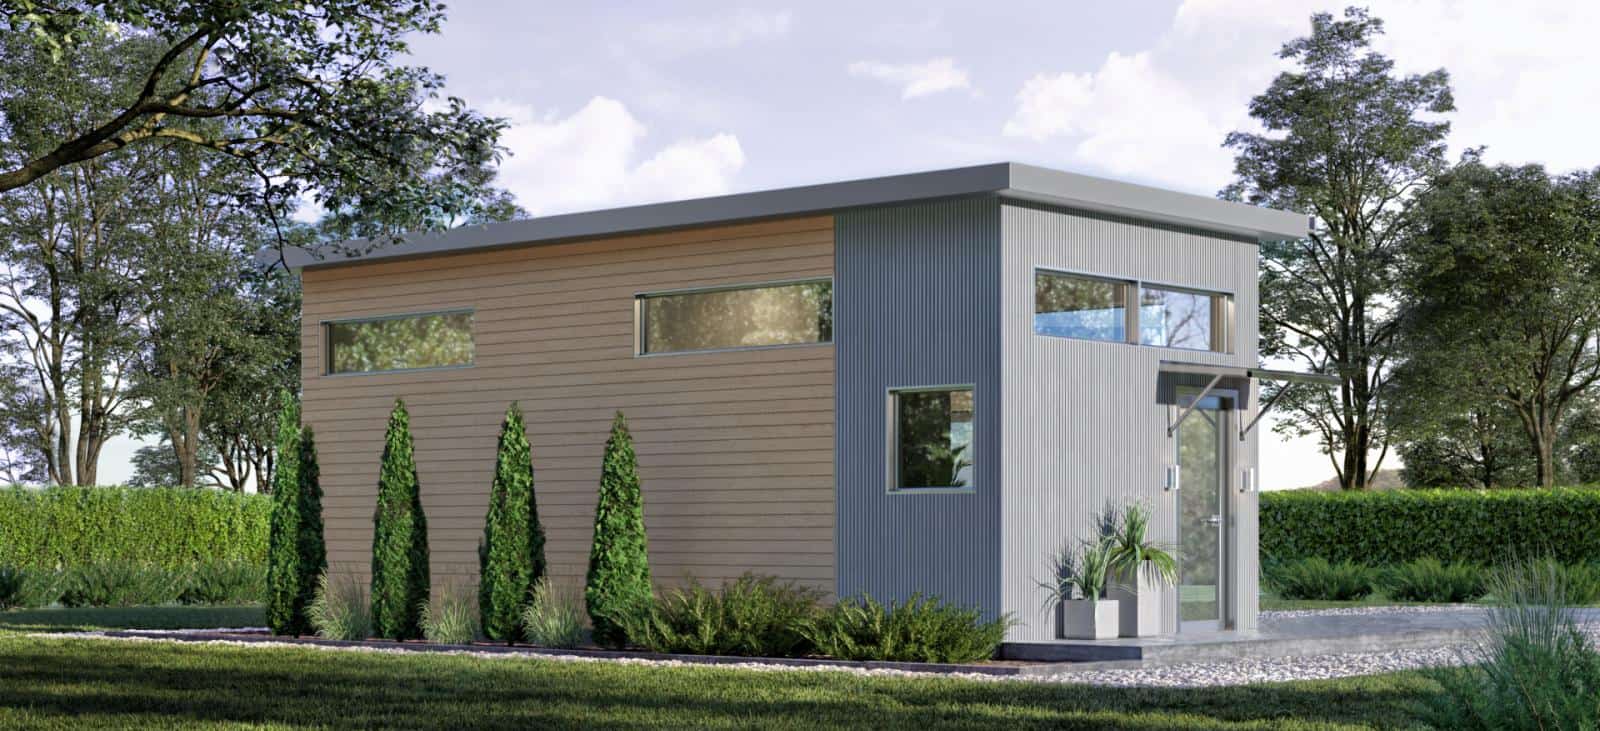 Summit Mini Home small prefab home or ADU by Dvele - exterior rear and side view.